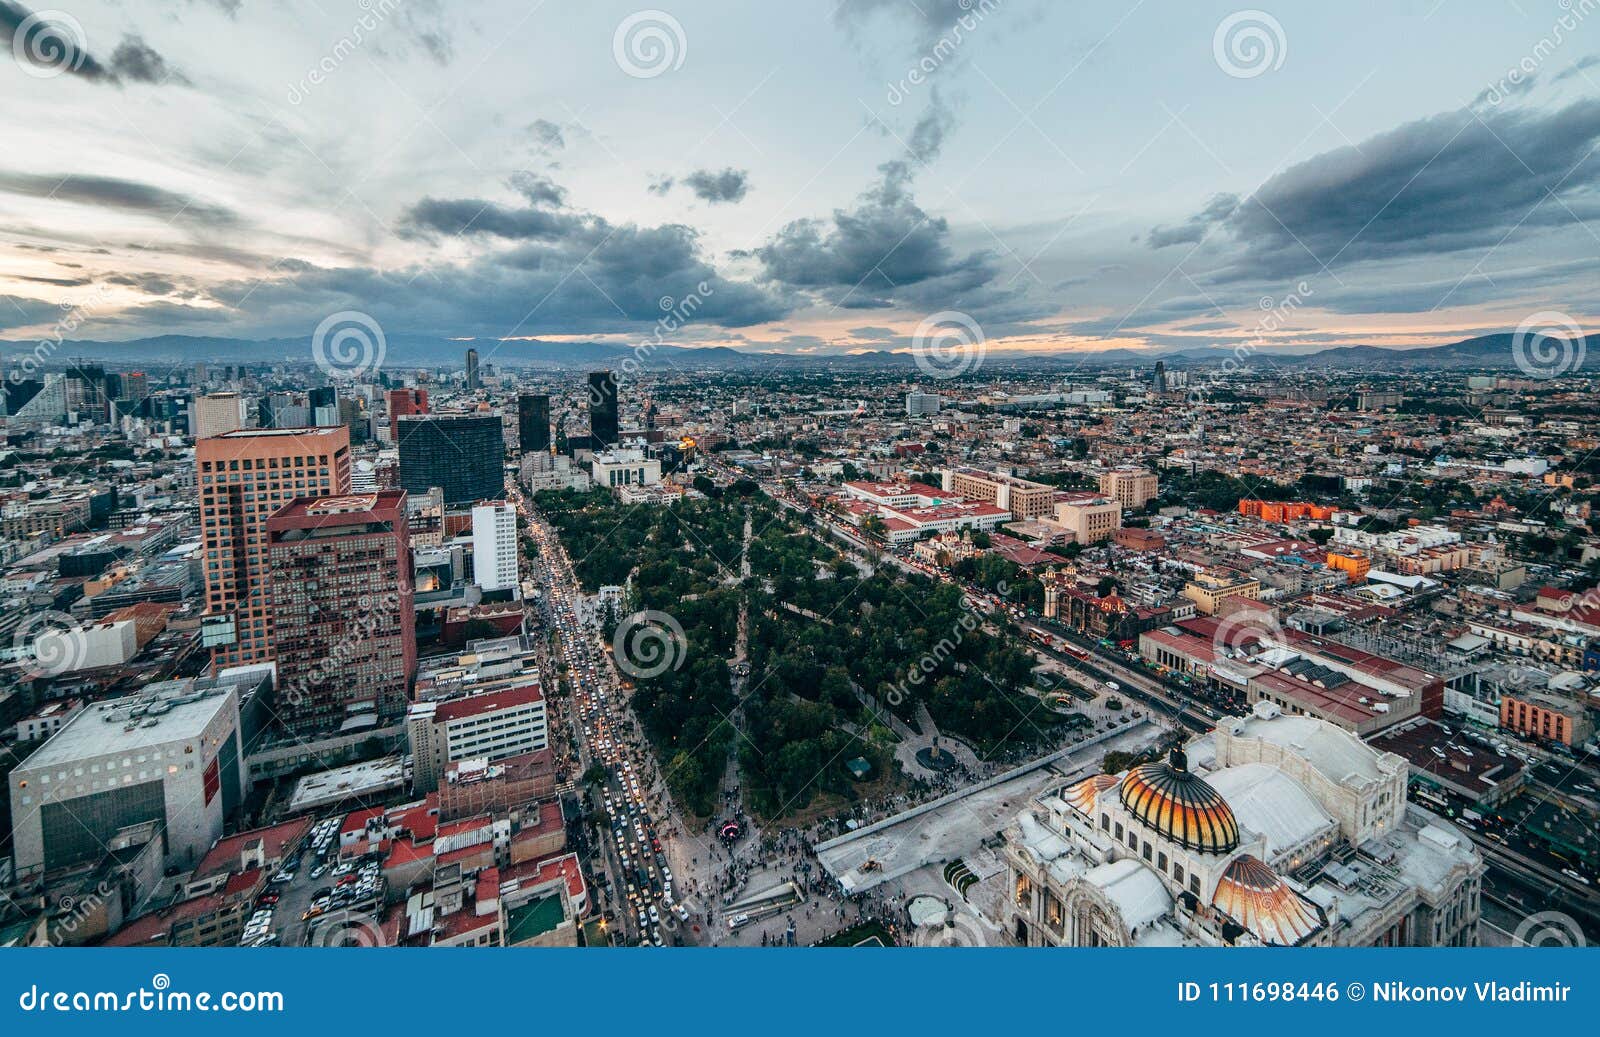 view of the green park alameda central in the city center of mexico city,